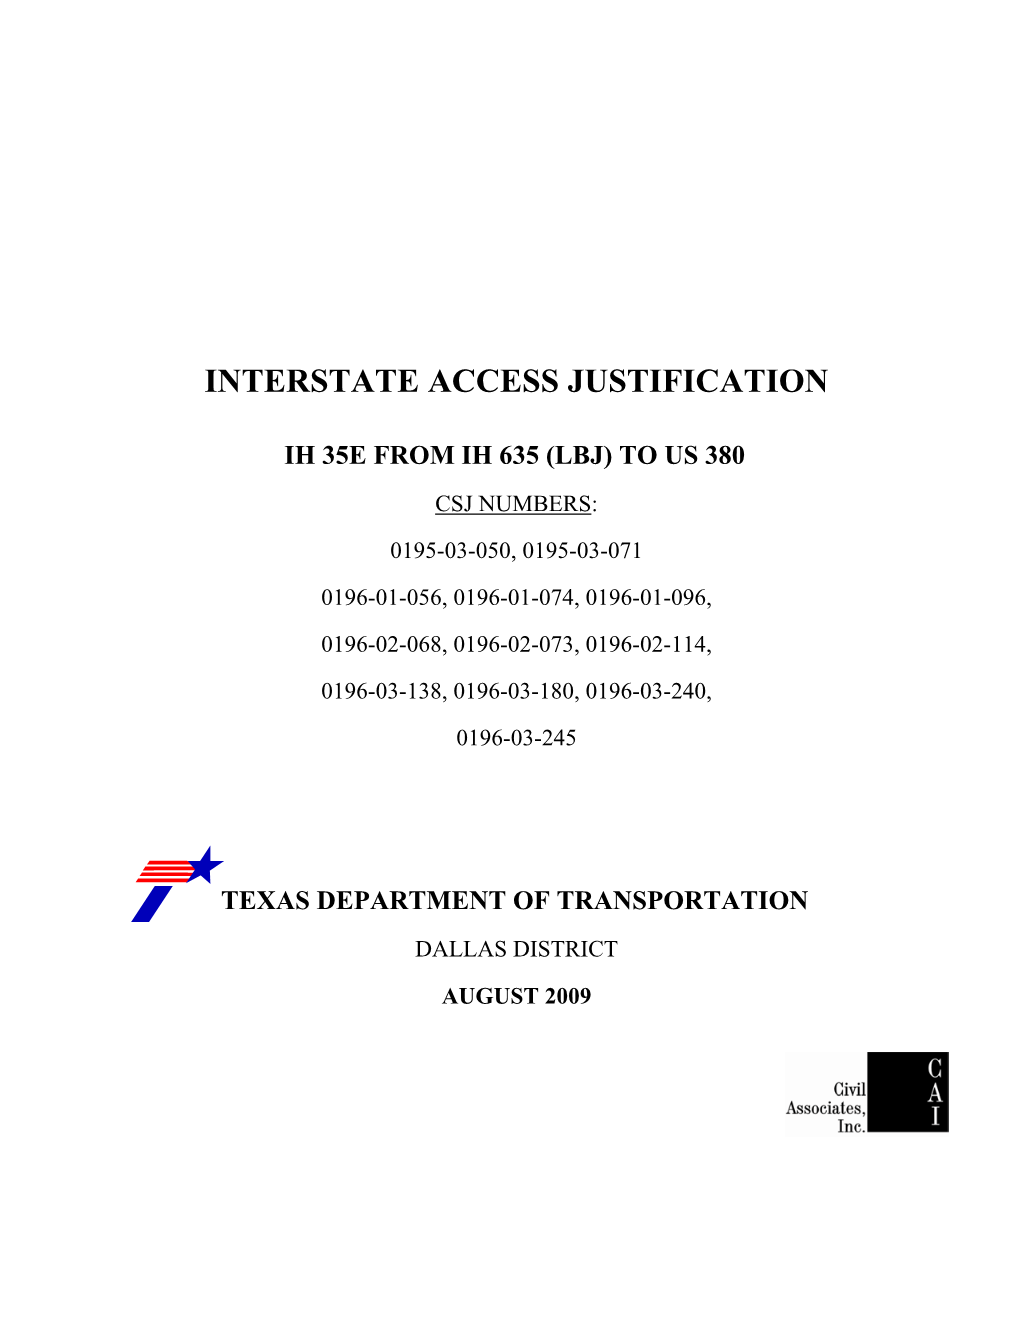 Interstate Access Justification